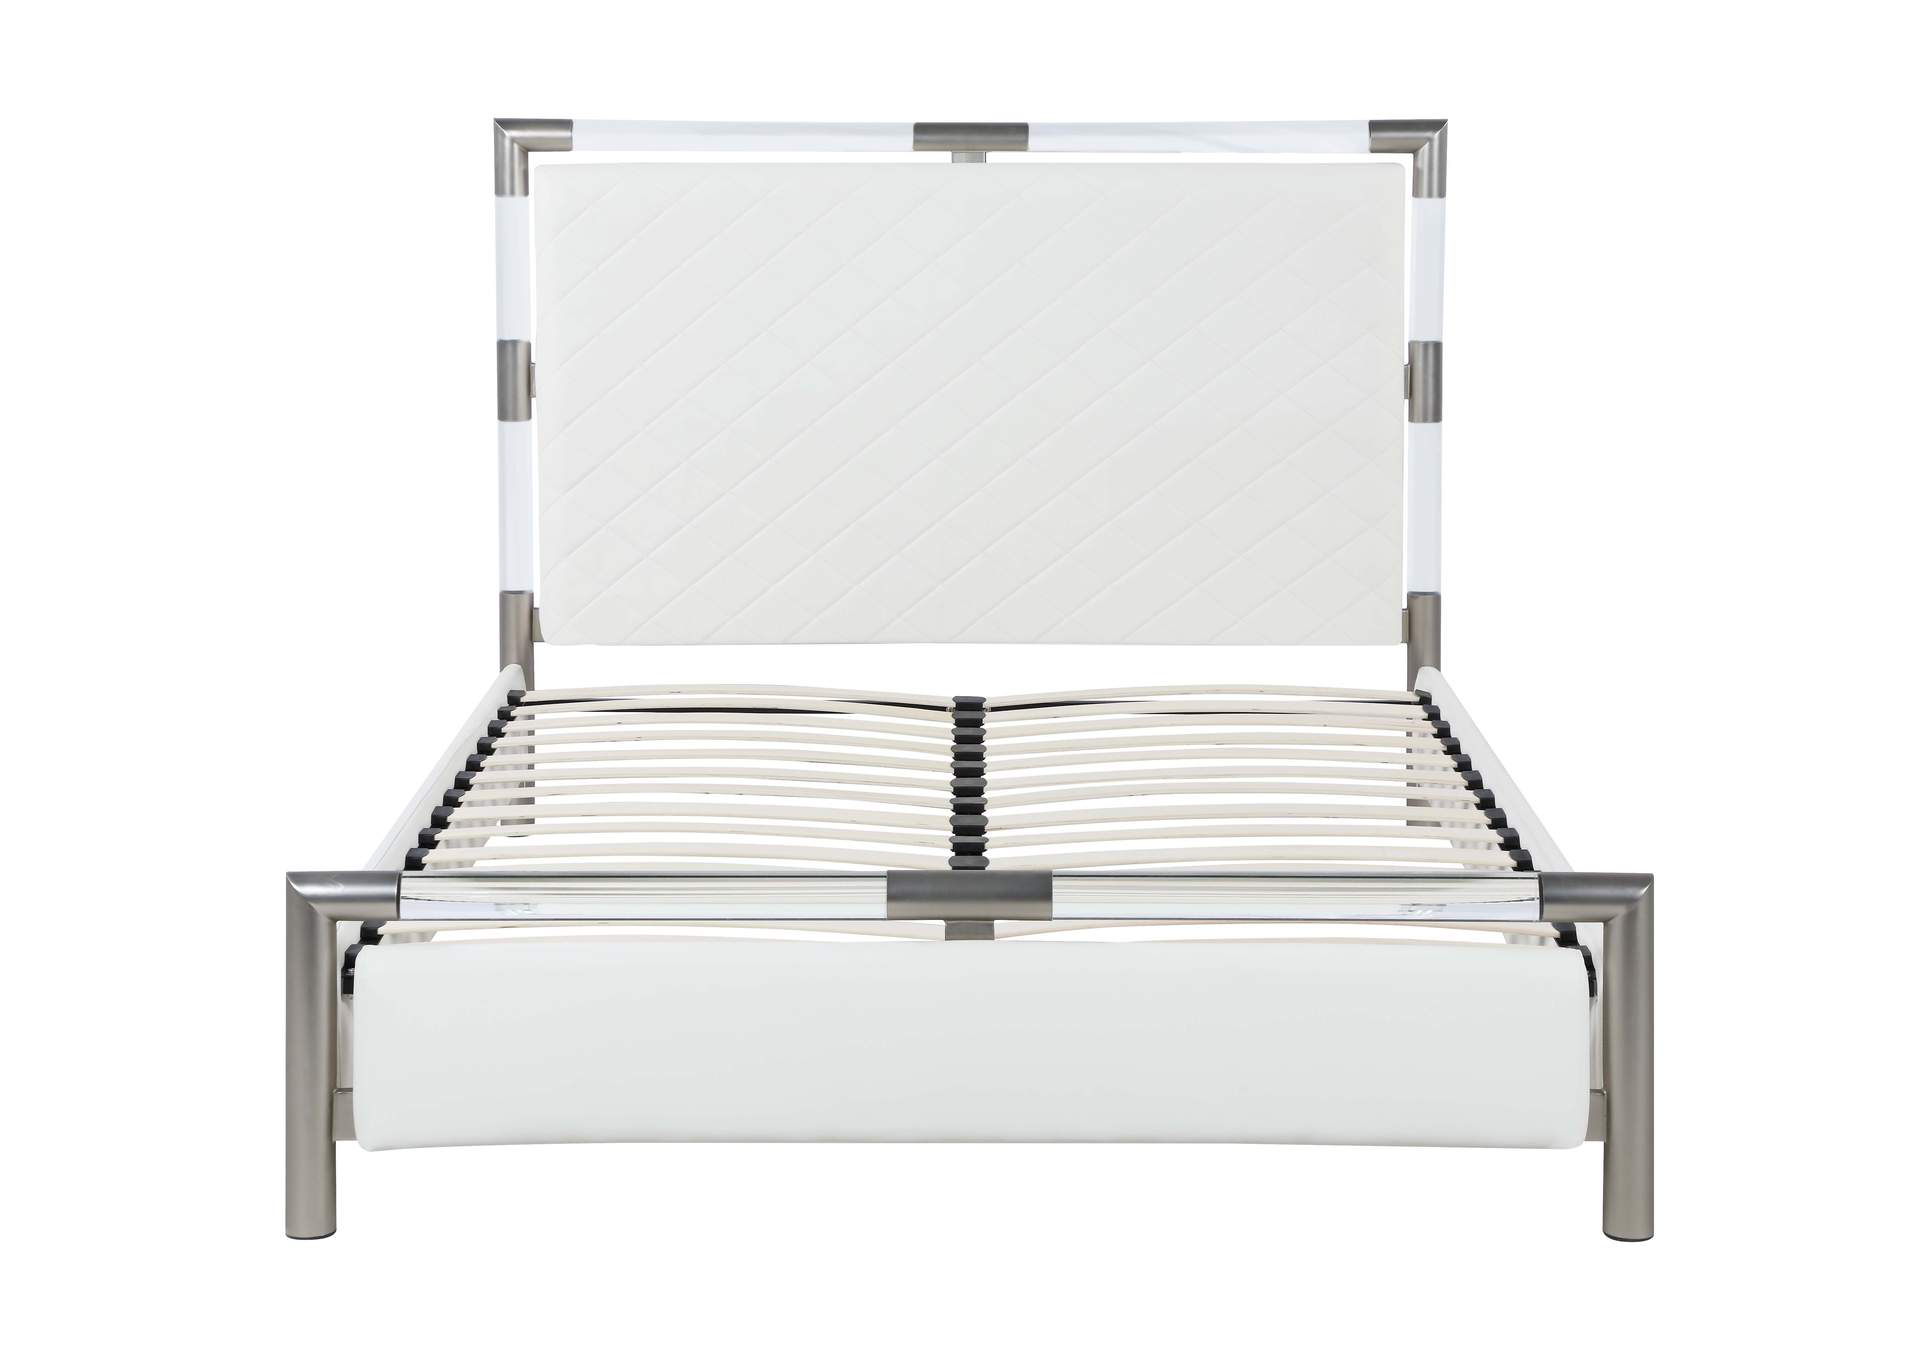 Upholstered Queen Bed w/ Solid Acrylic and Brushed Nickel Frame,Chintaly Imports